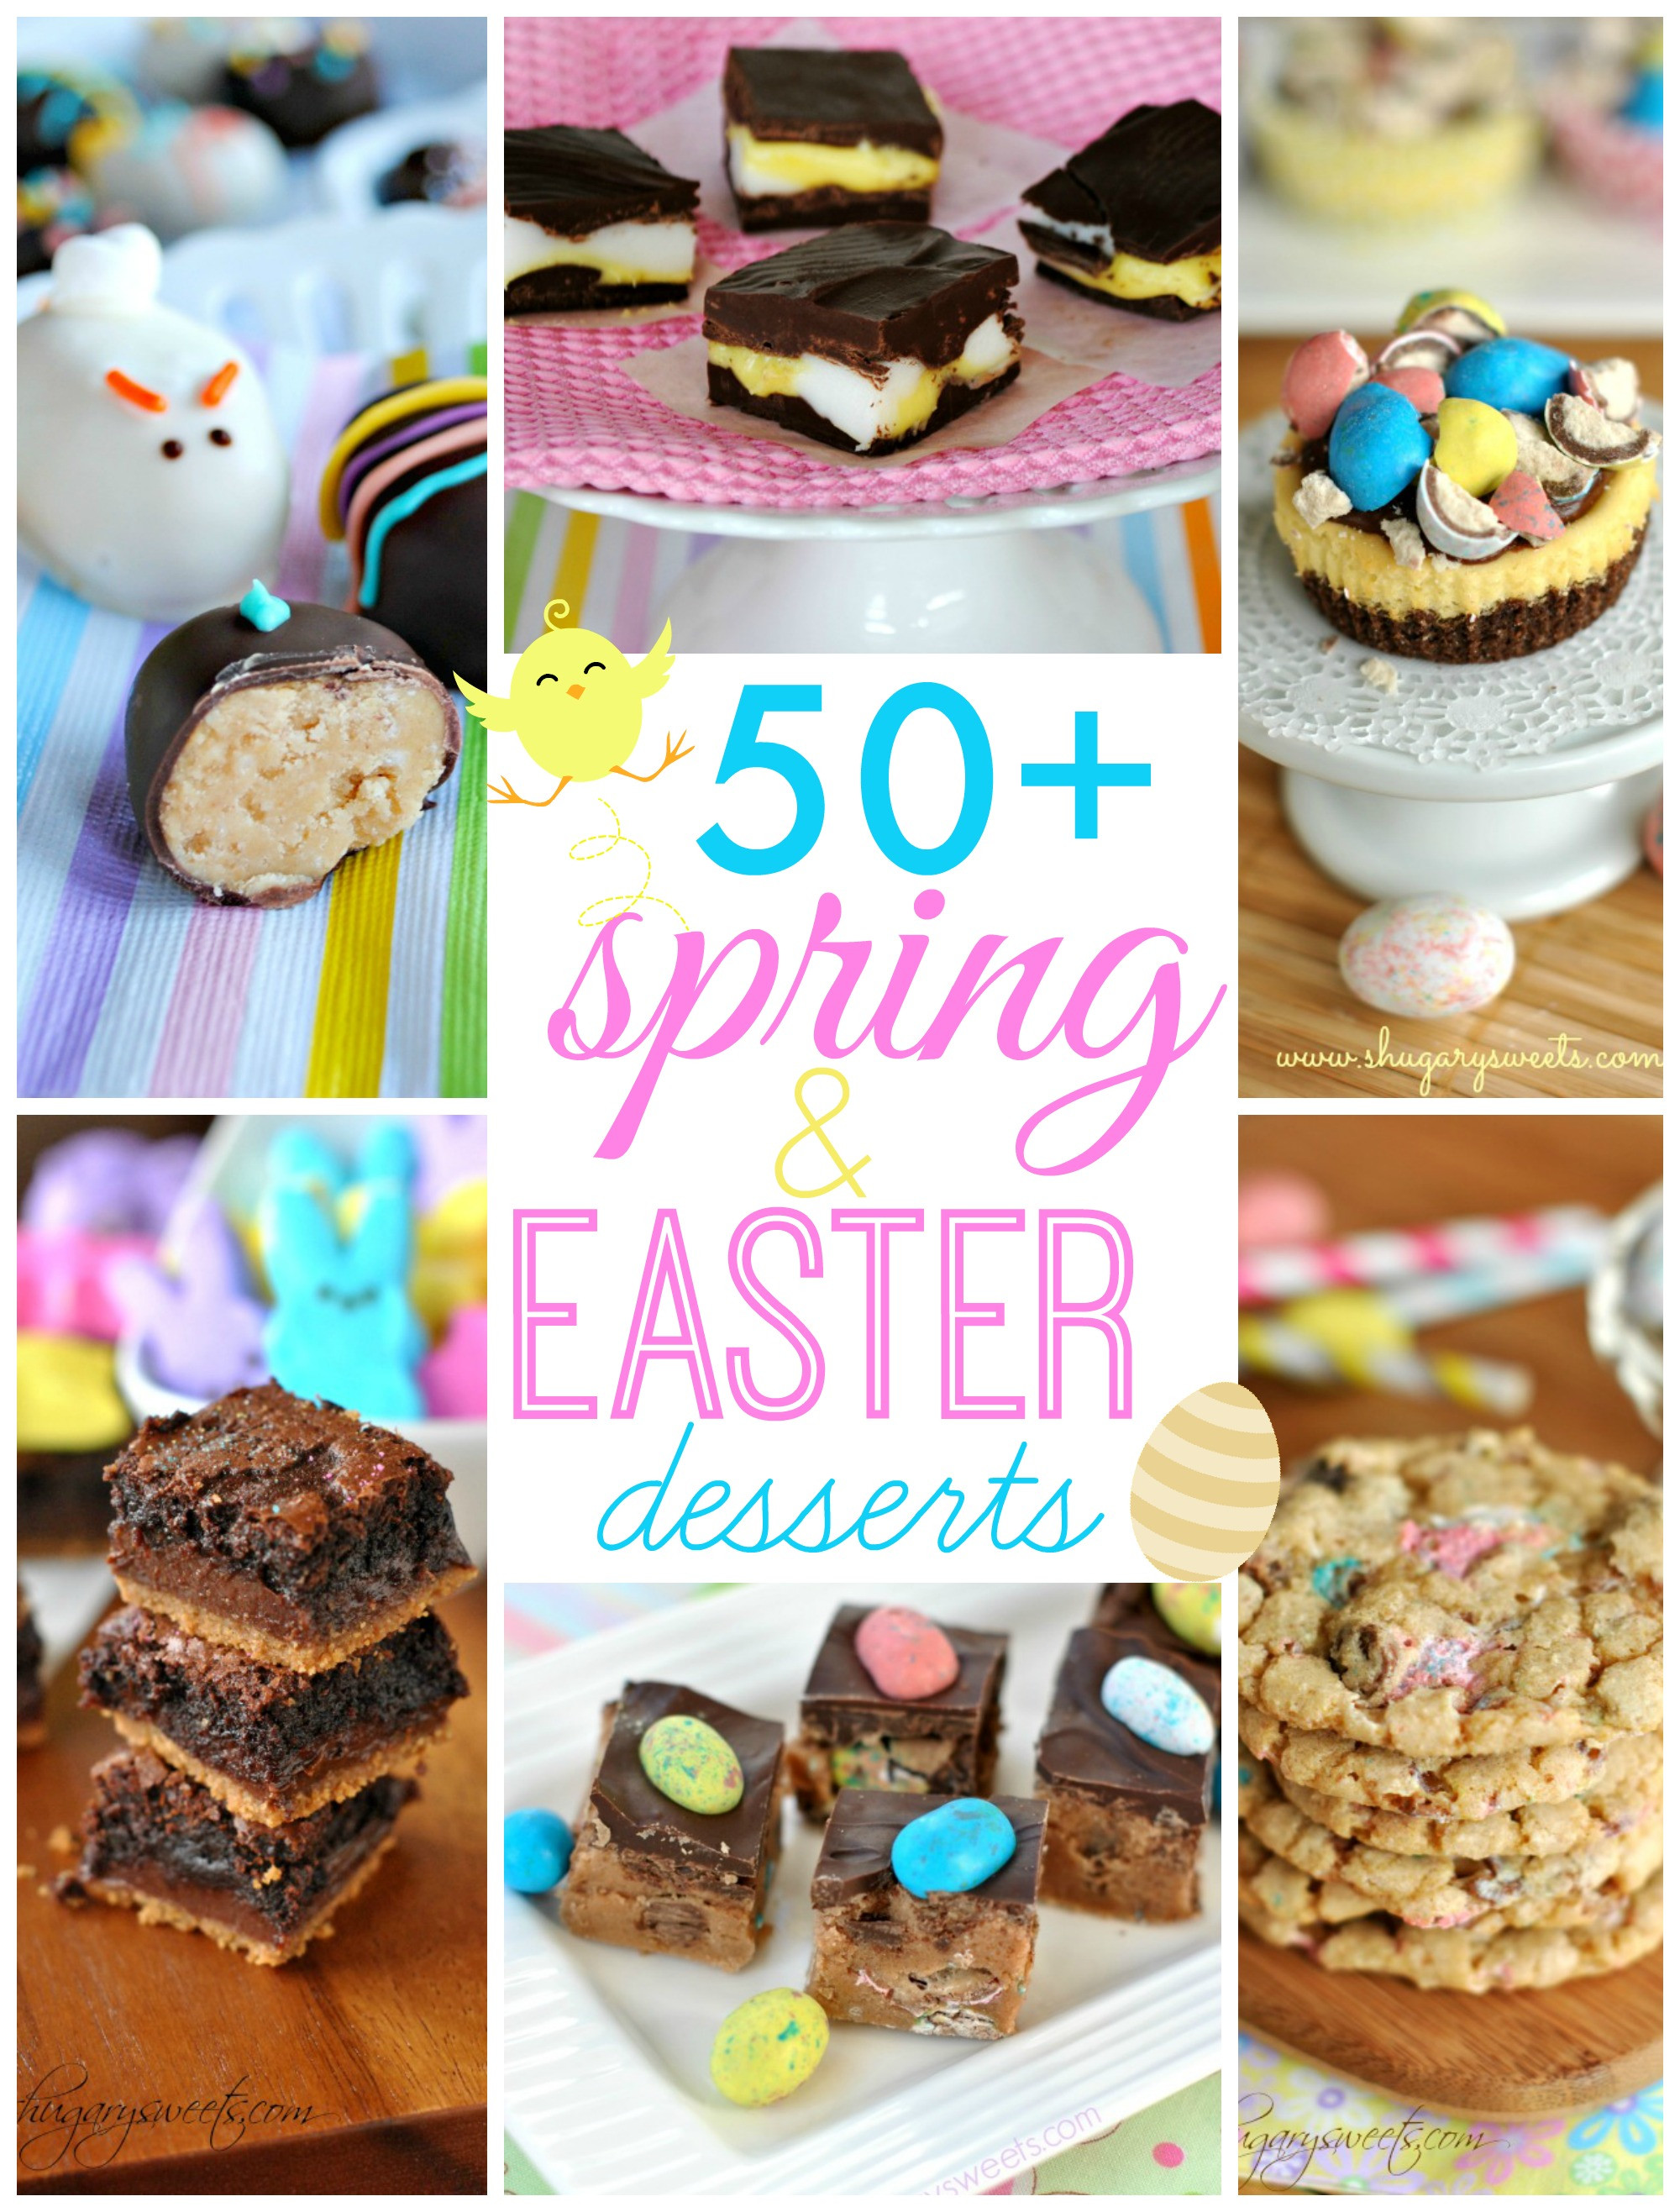 Easter Desserts Ideas
 50 Easter Desserts Shugary Sweets